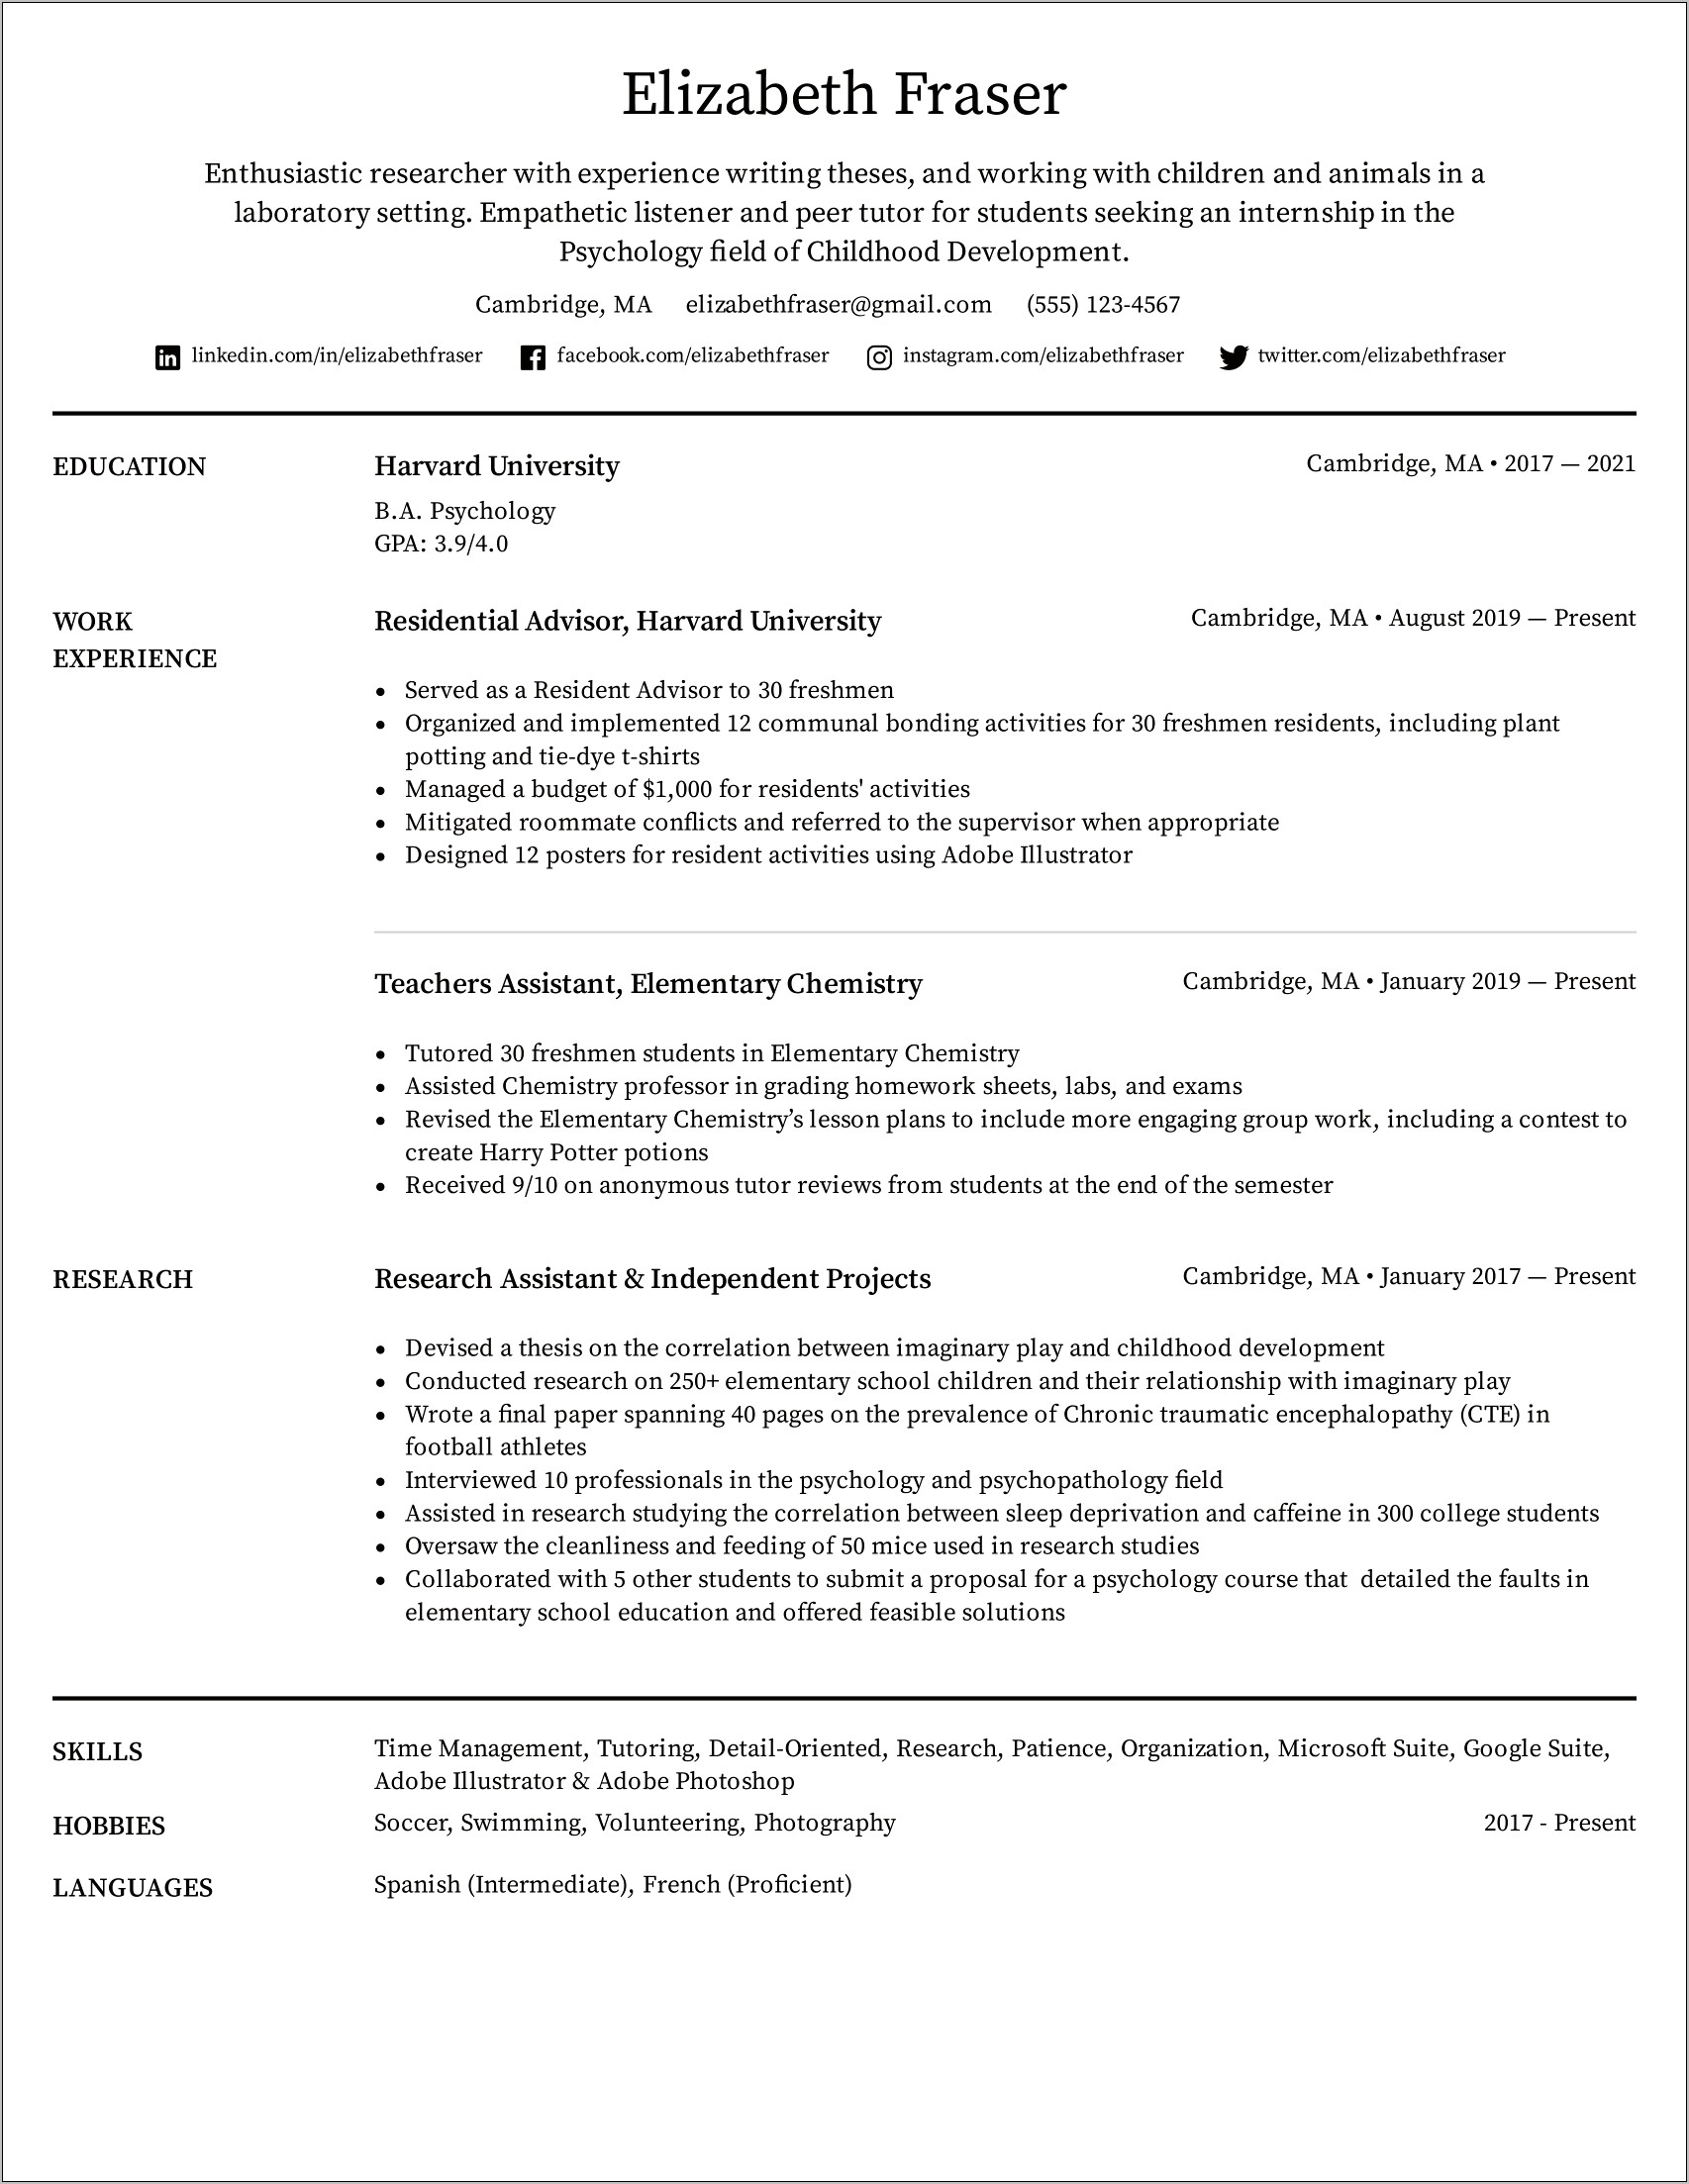 College Education Section Of Resume With Major Example